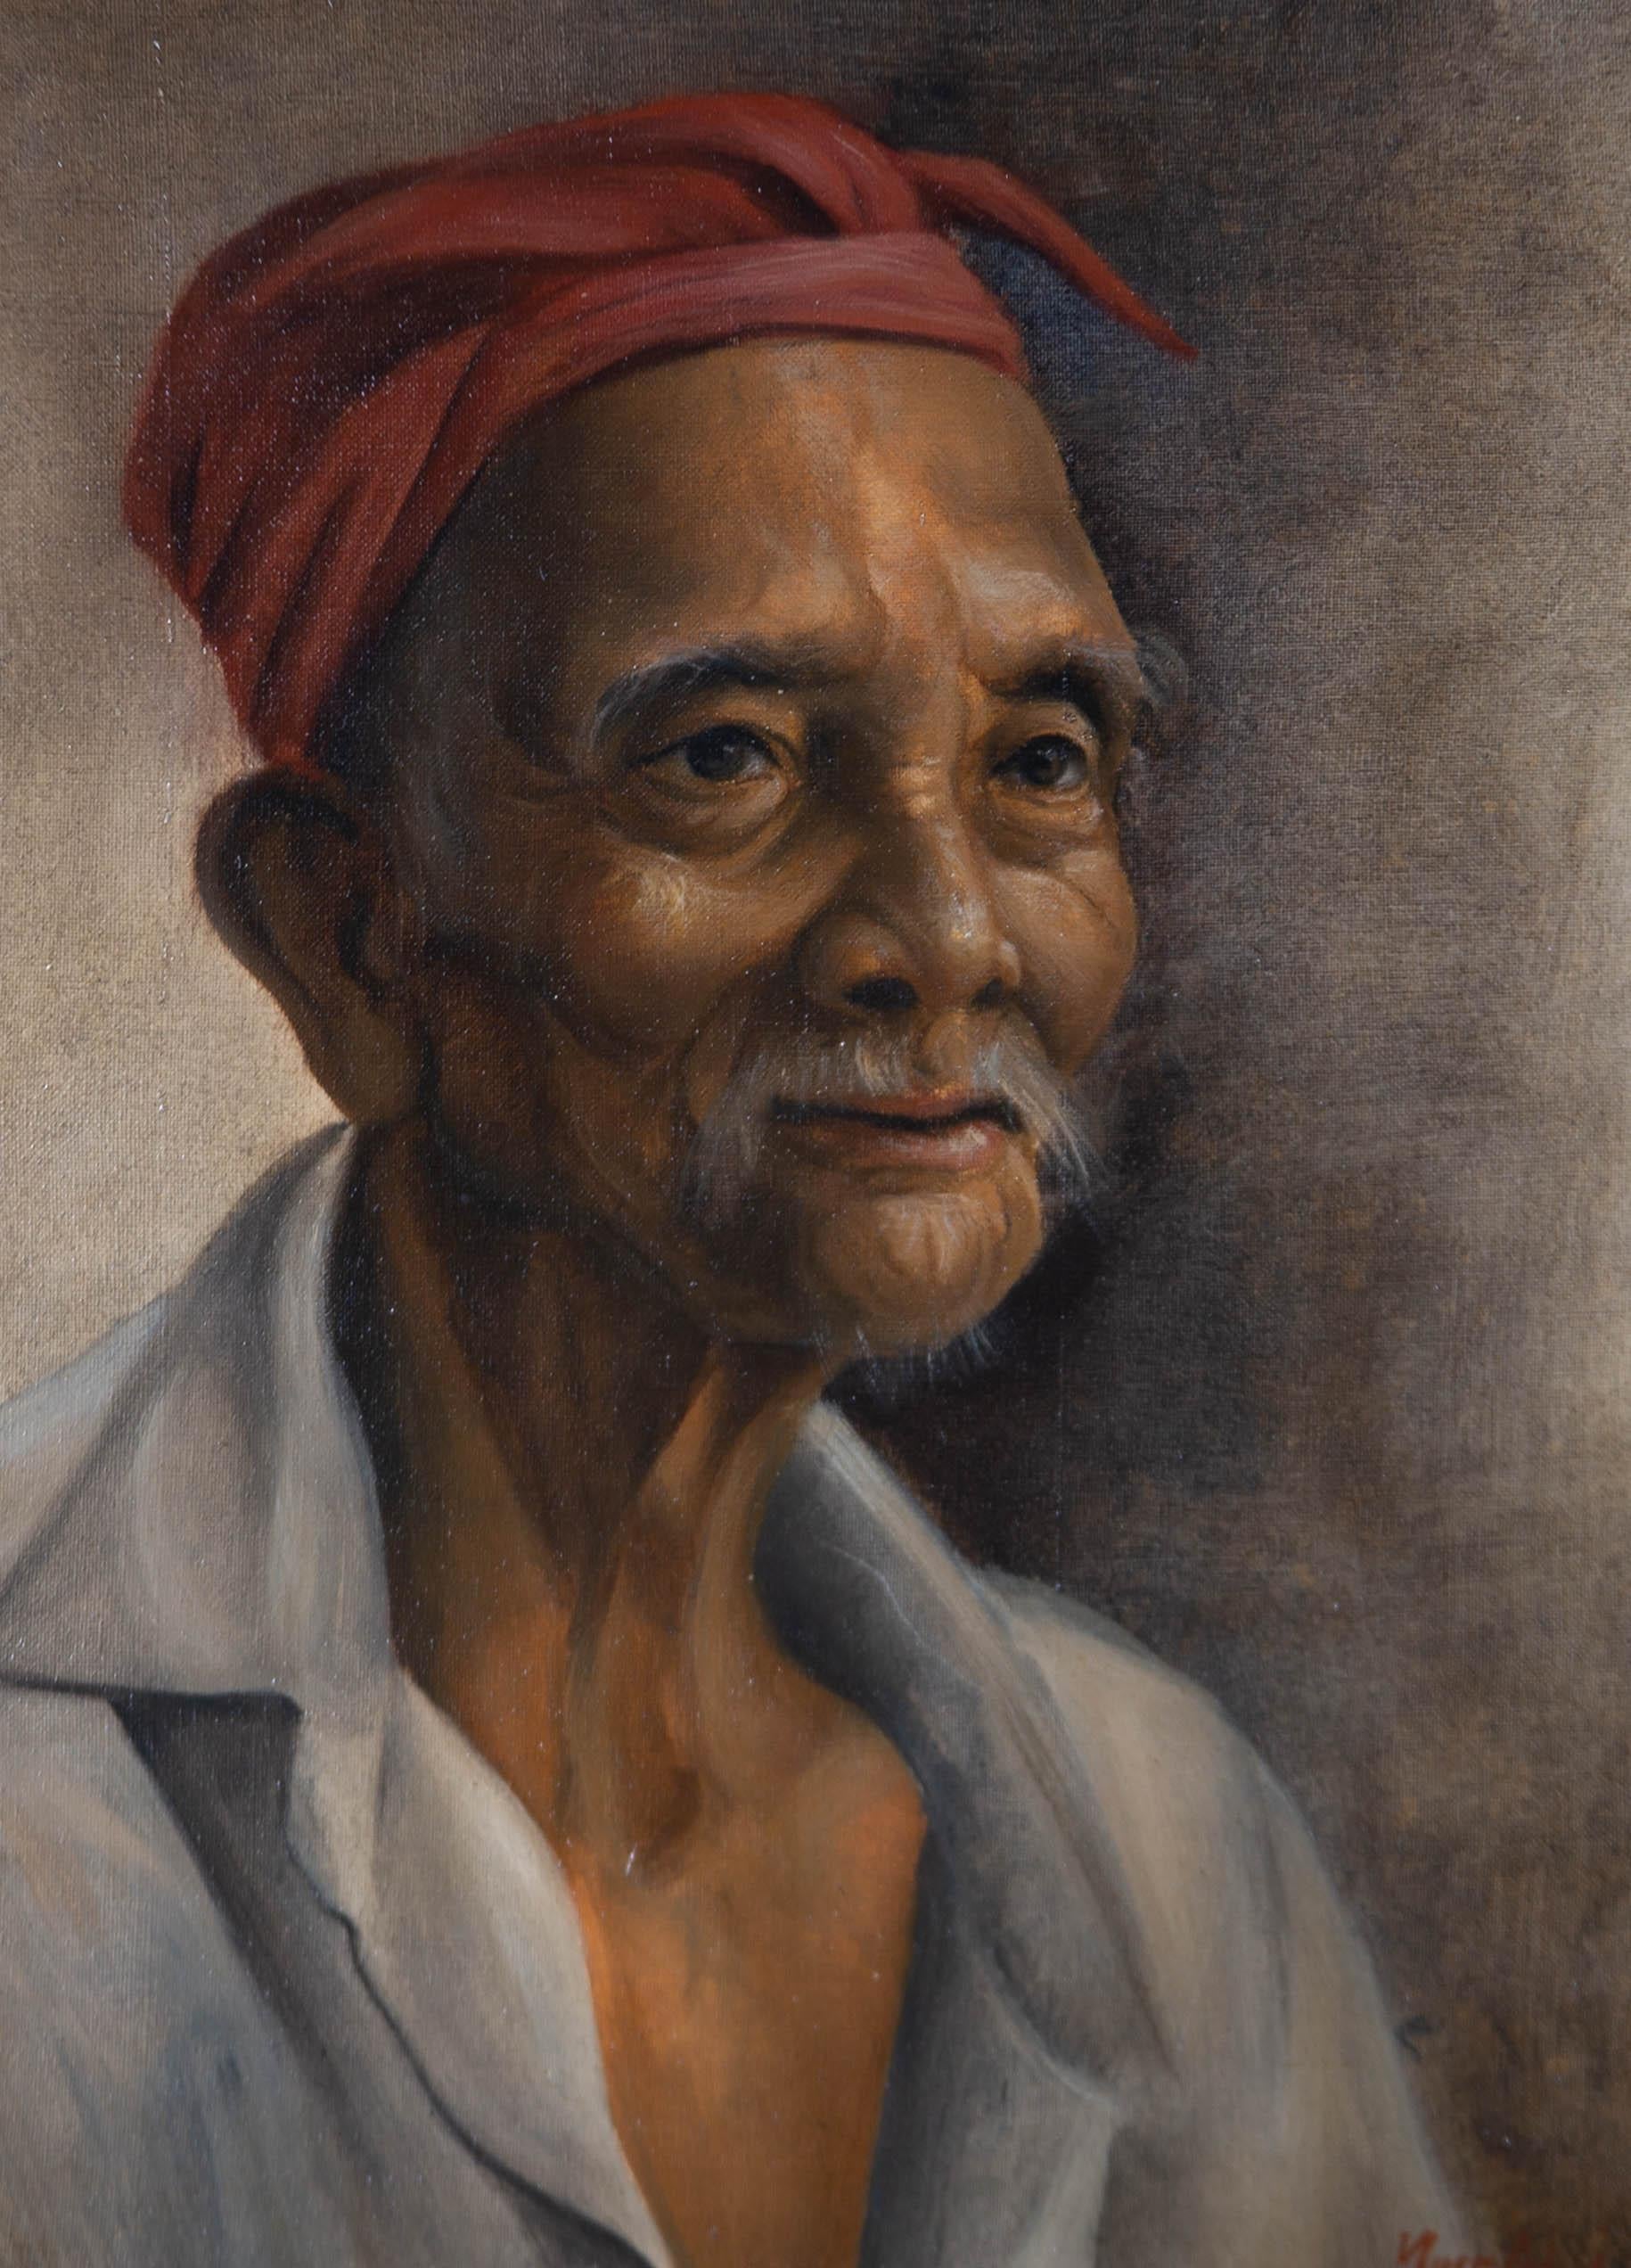 1985 Oil - Old Village Chief - Brown Portrait Painting by Unknown